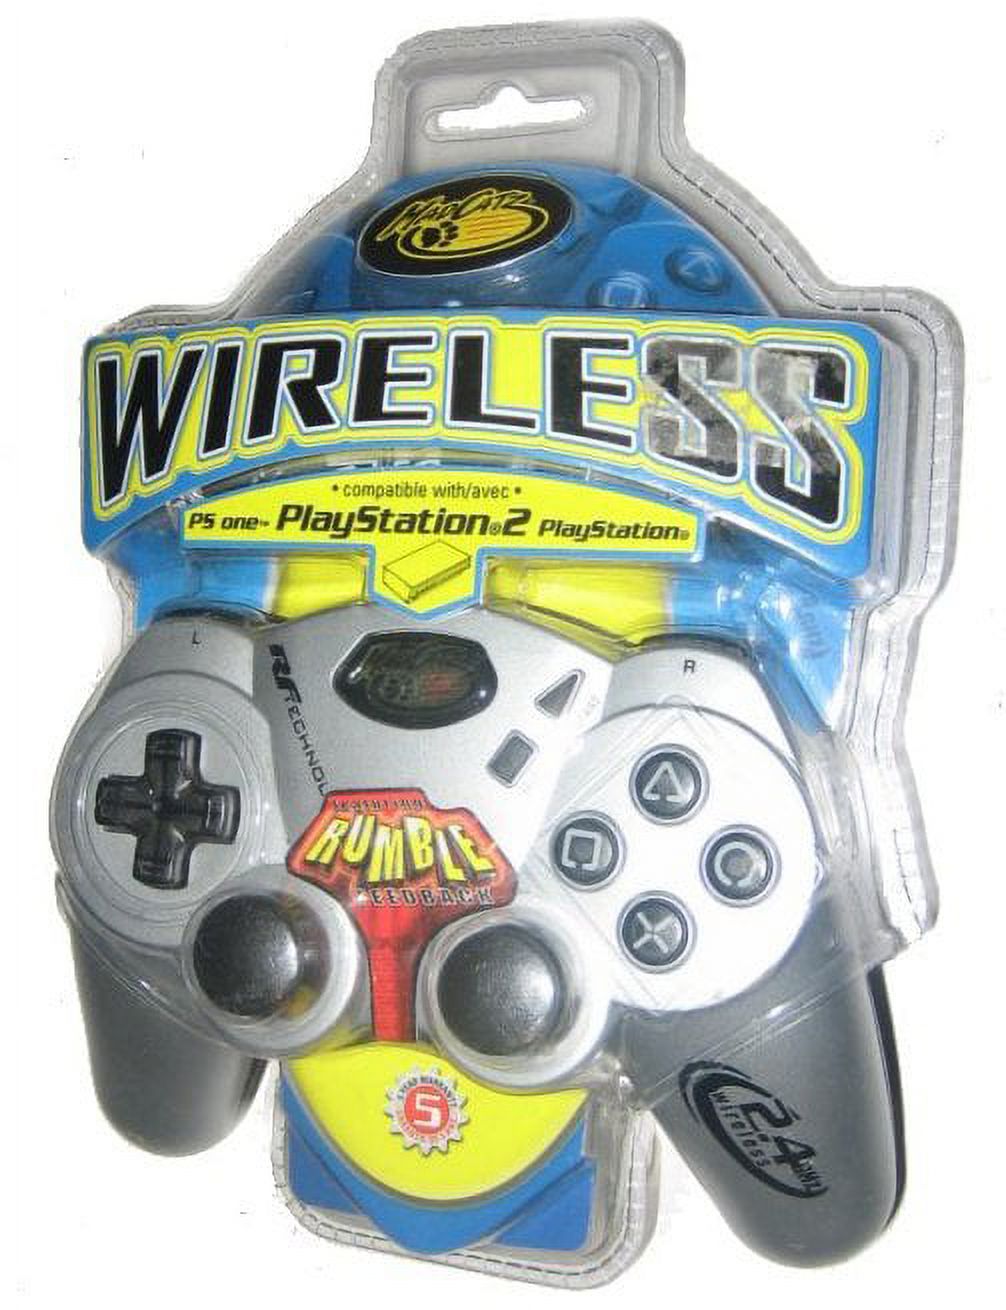 Wireless controllers, any good? : r/ps2